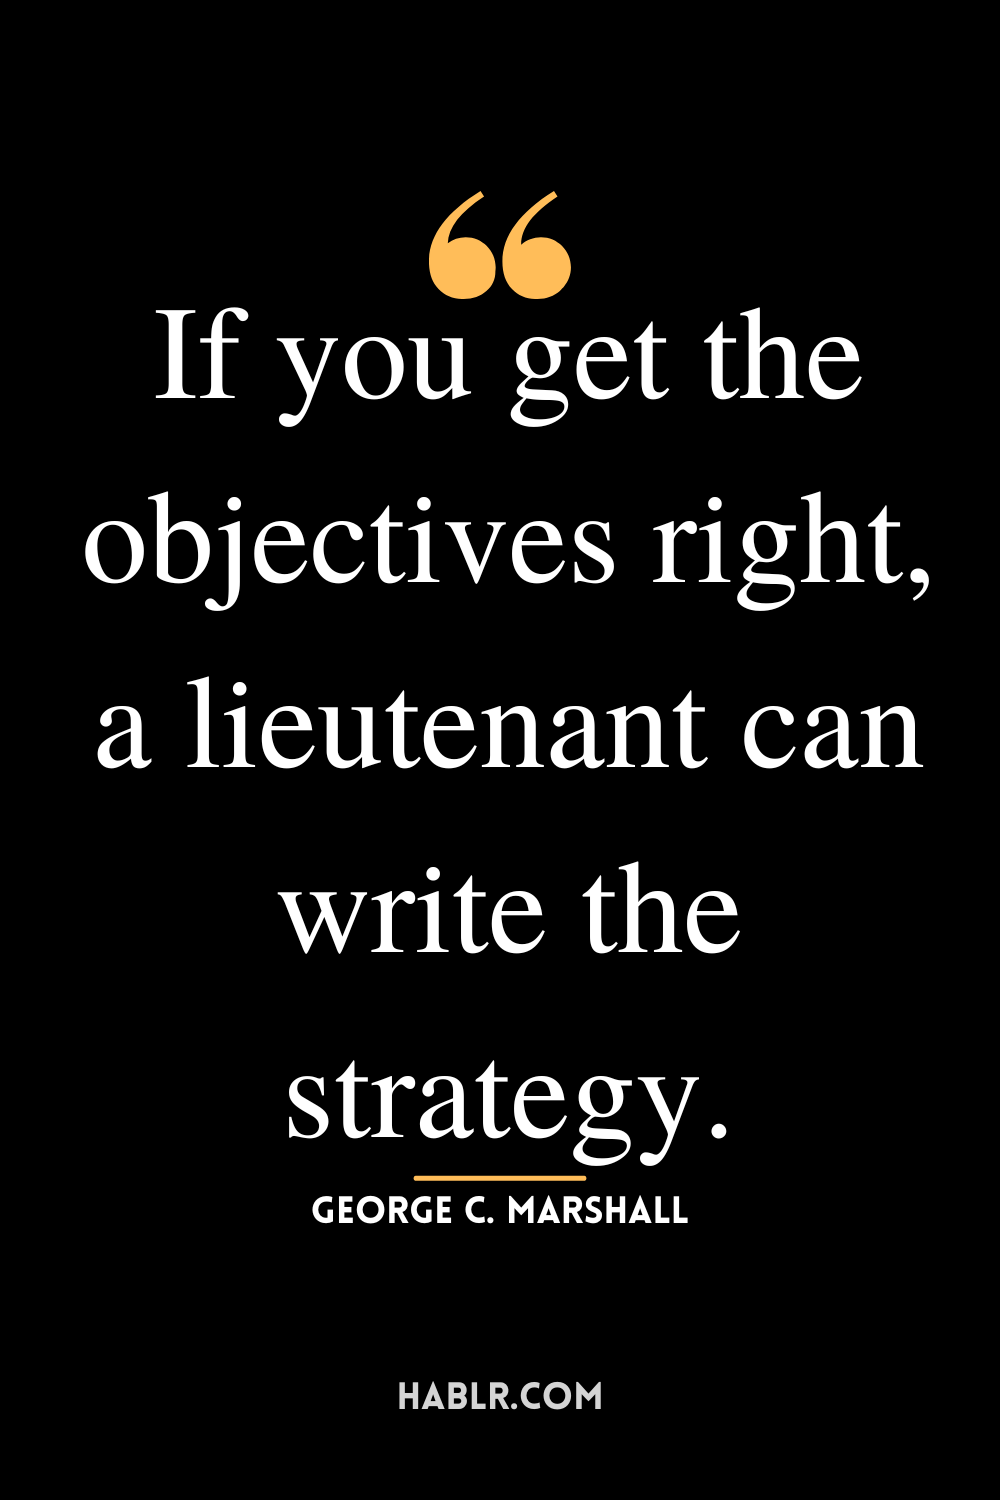 “If you get the objectives right, a lieutenant can write the strategy.”-George C. Marshall